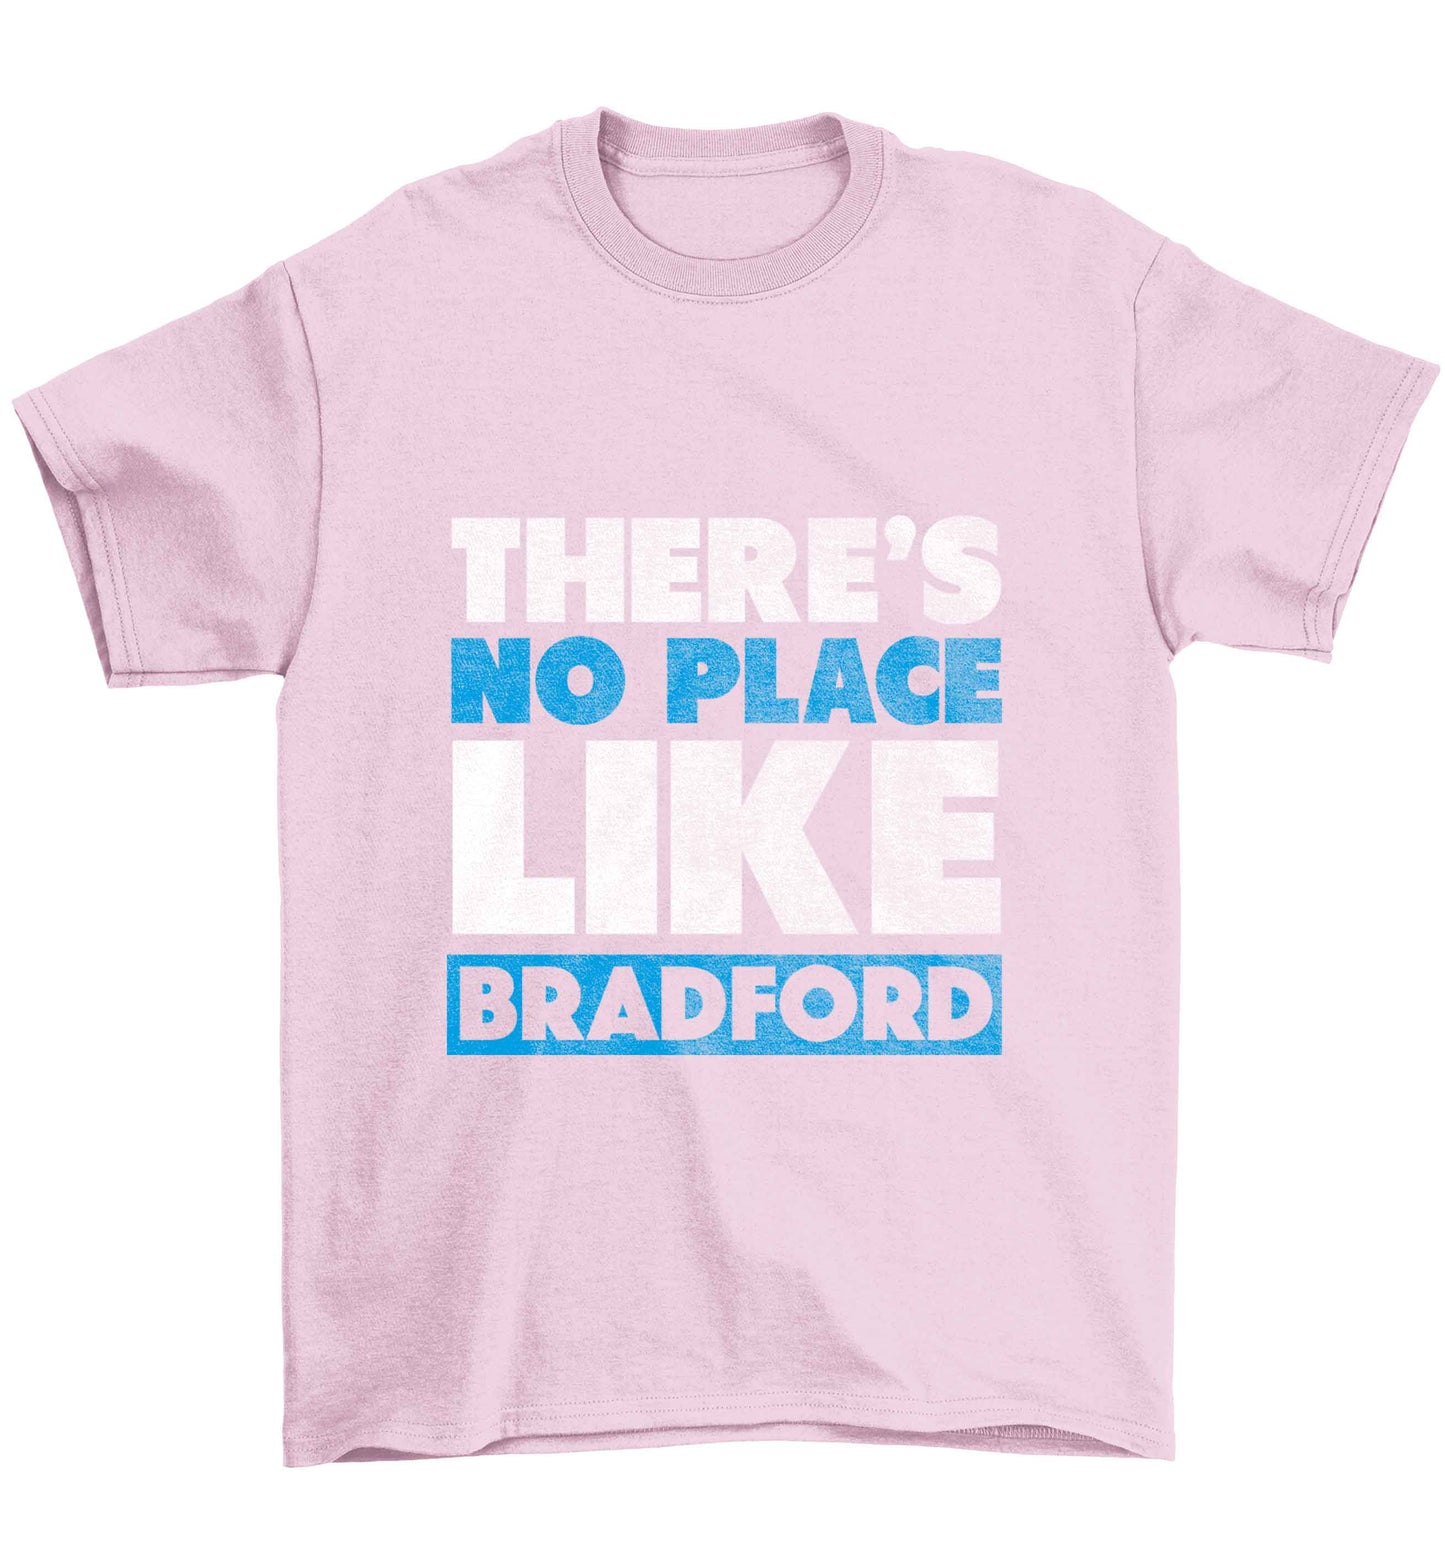 There's no place like Bradford Children's light pink Tshirt 12-13 Years